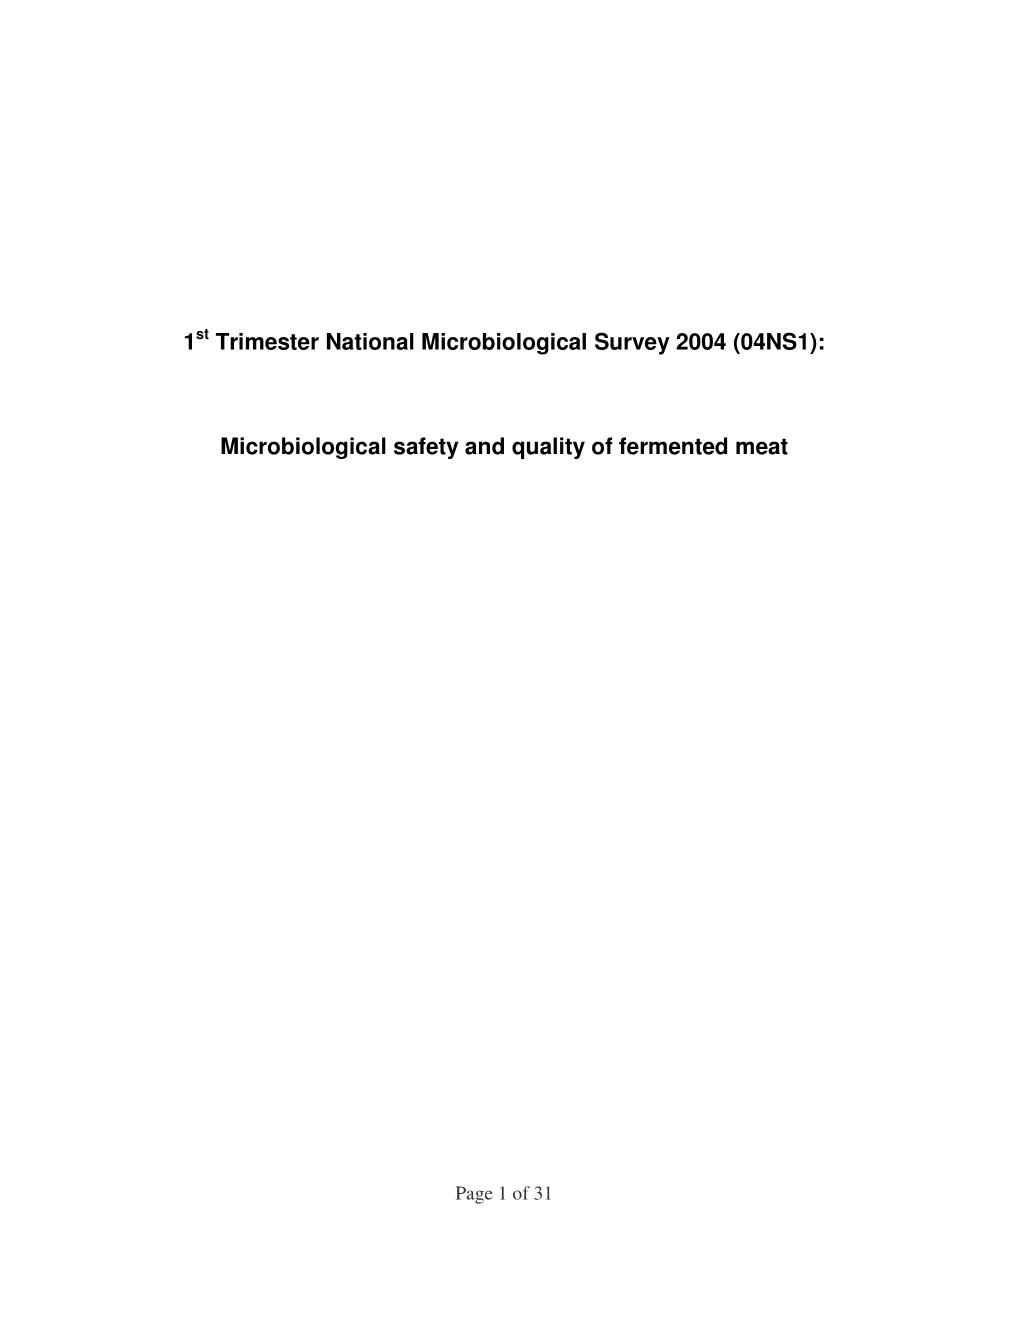 (04NS1): Microbiological Safety and Quality of Fermented Meat